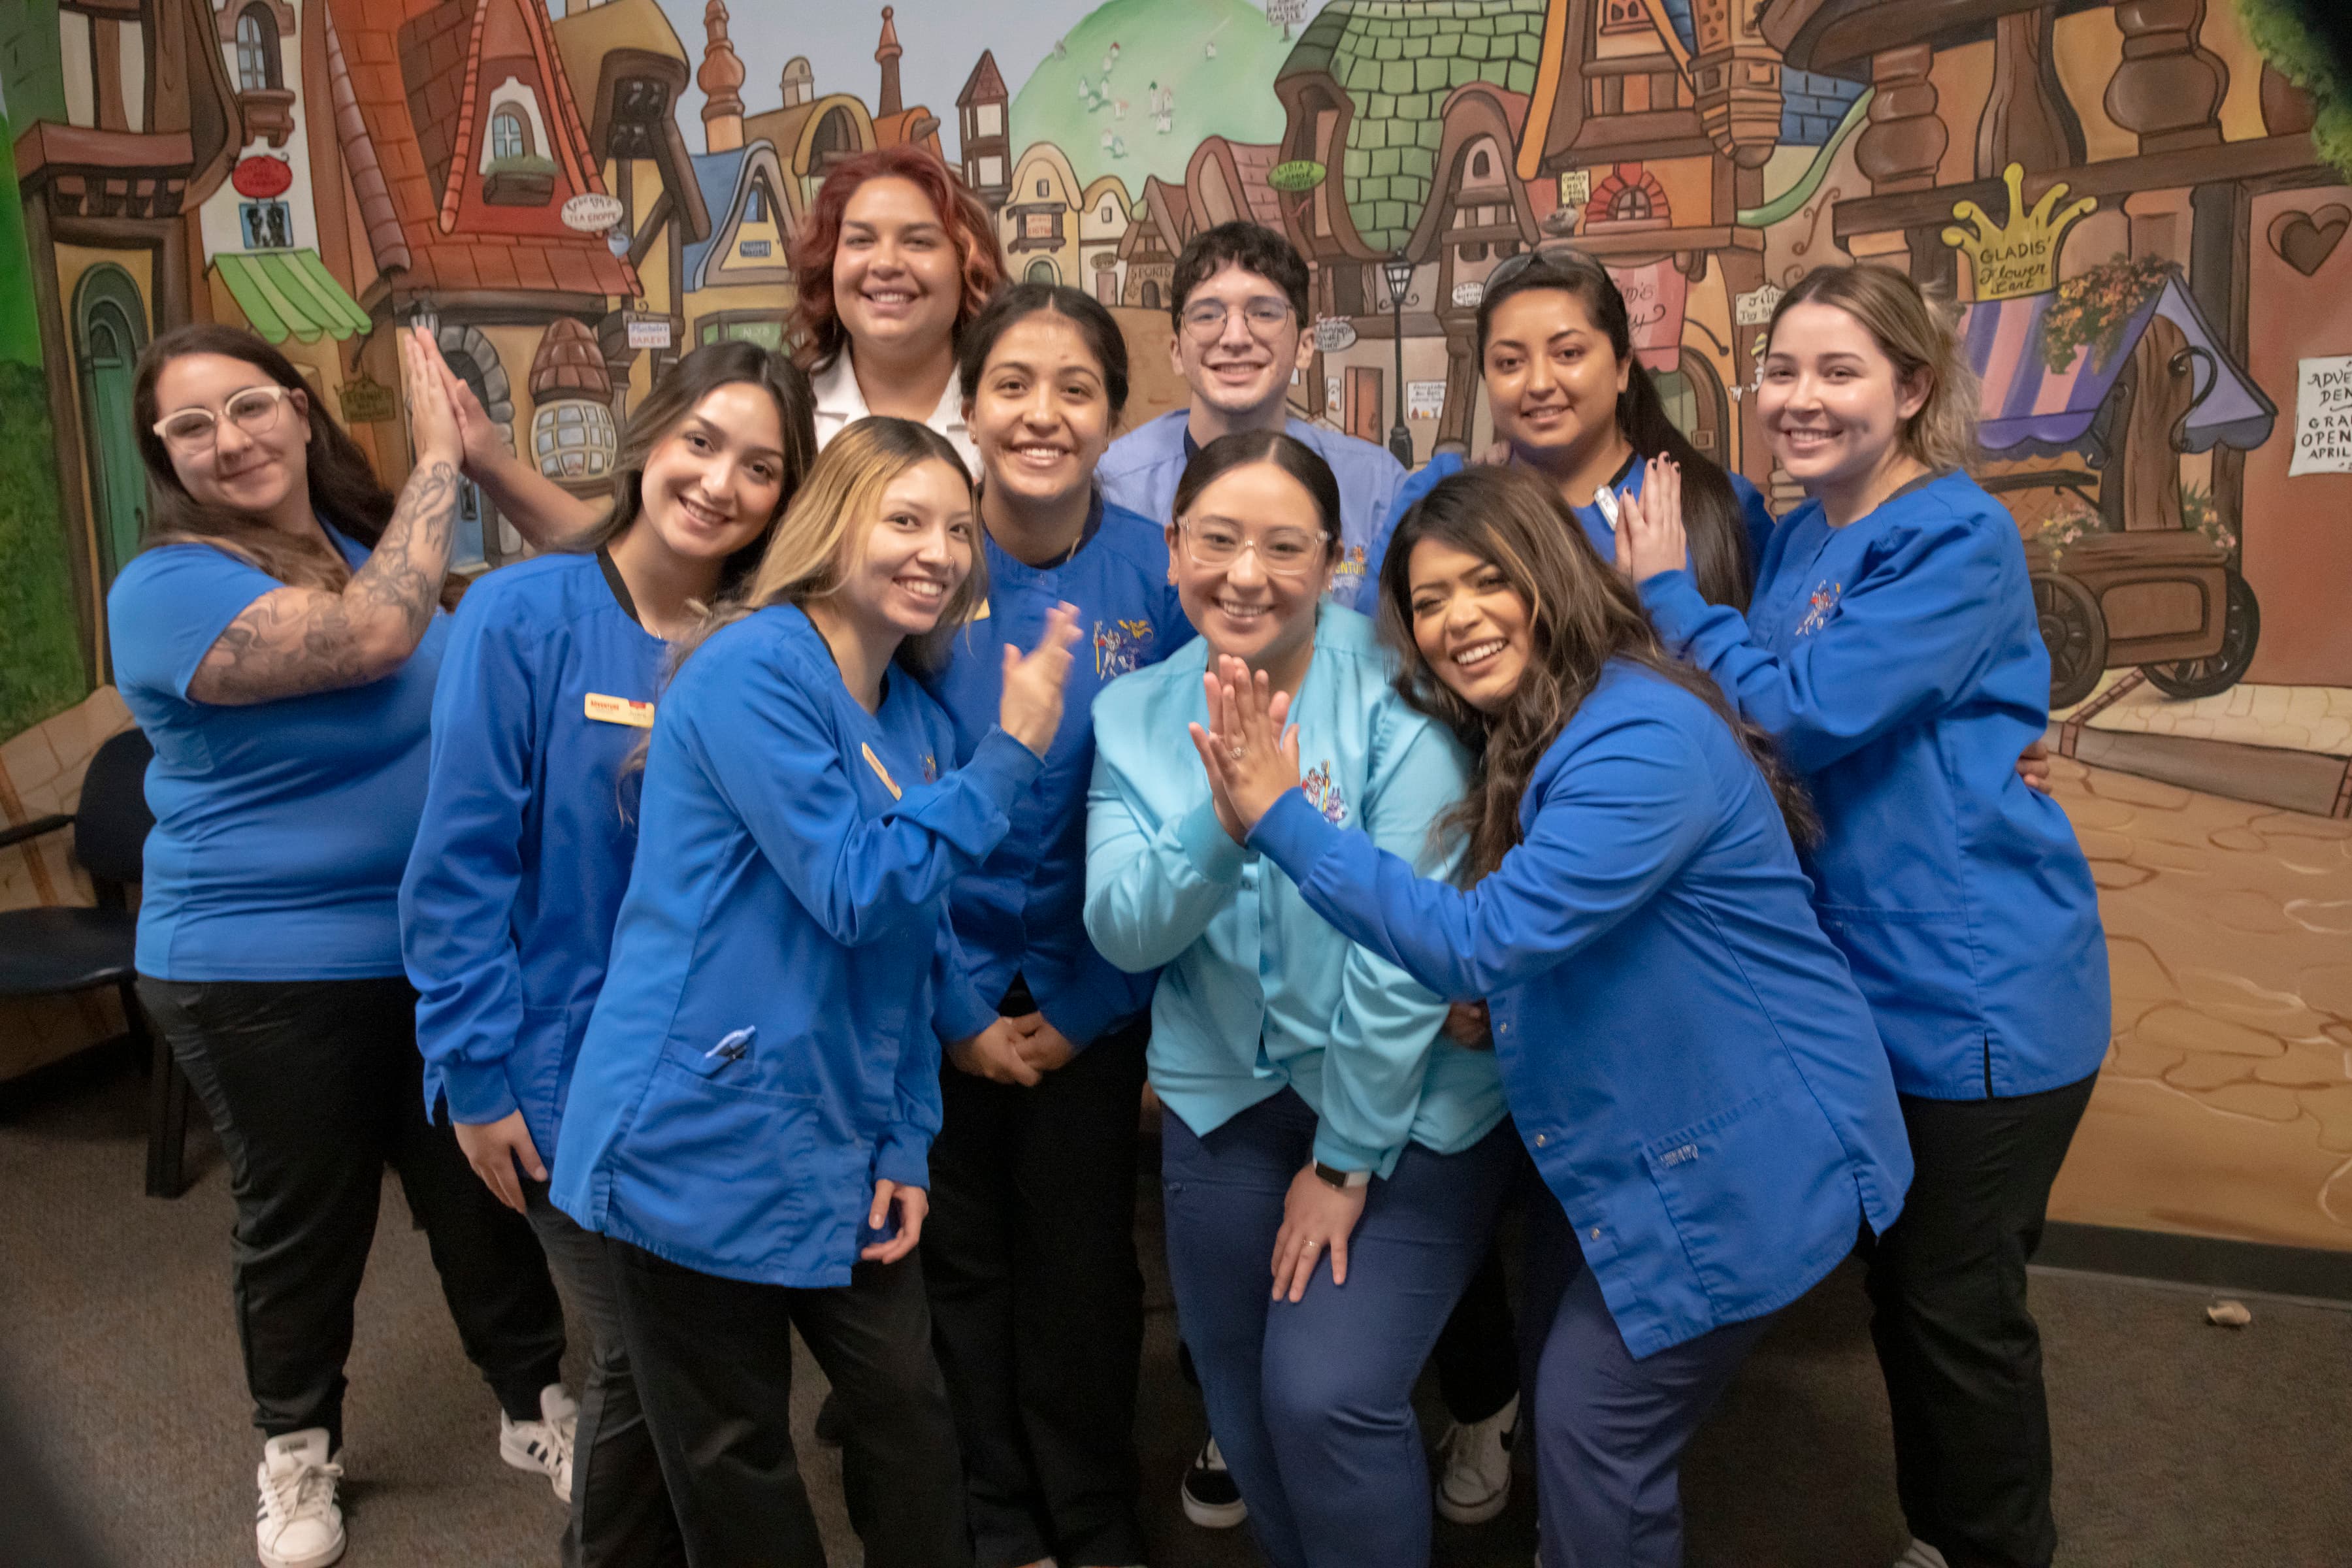 Pediatric dentistry, visions and orthodontic healthcare professionals at our Longmont office. Nine woman are waving and smiling wearing blue uniforms.